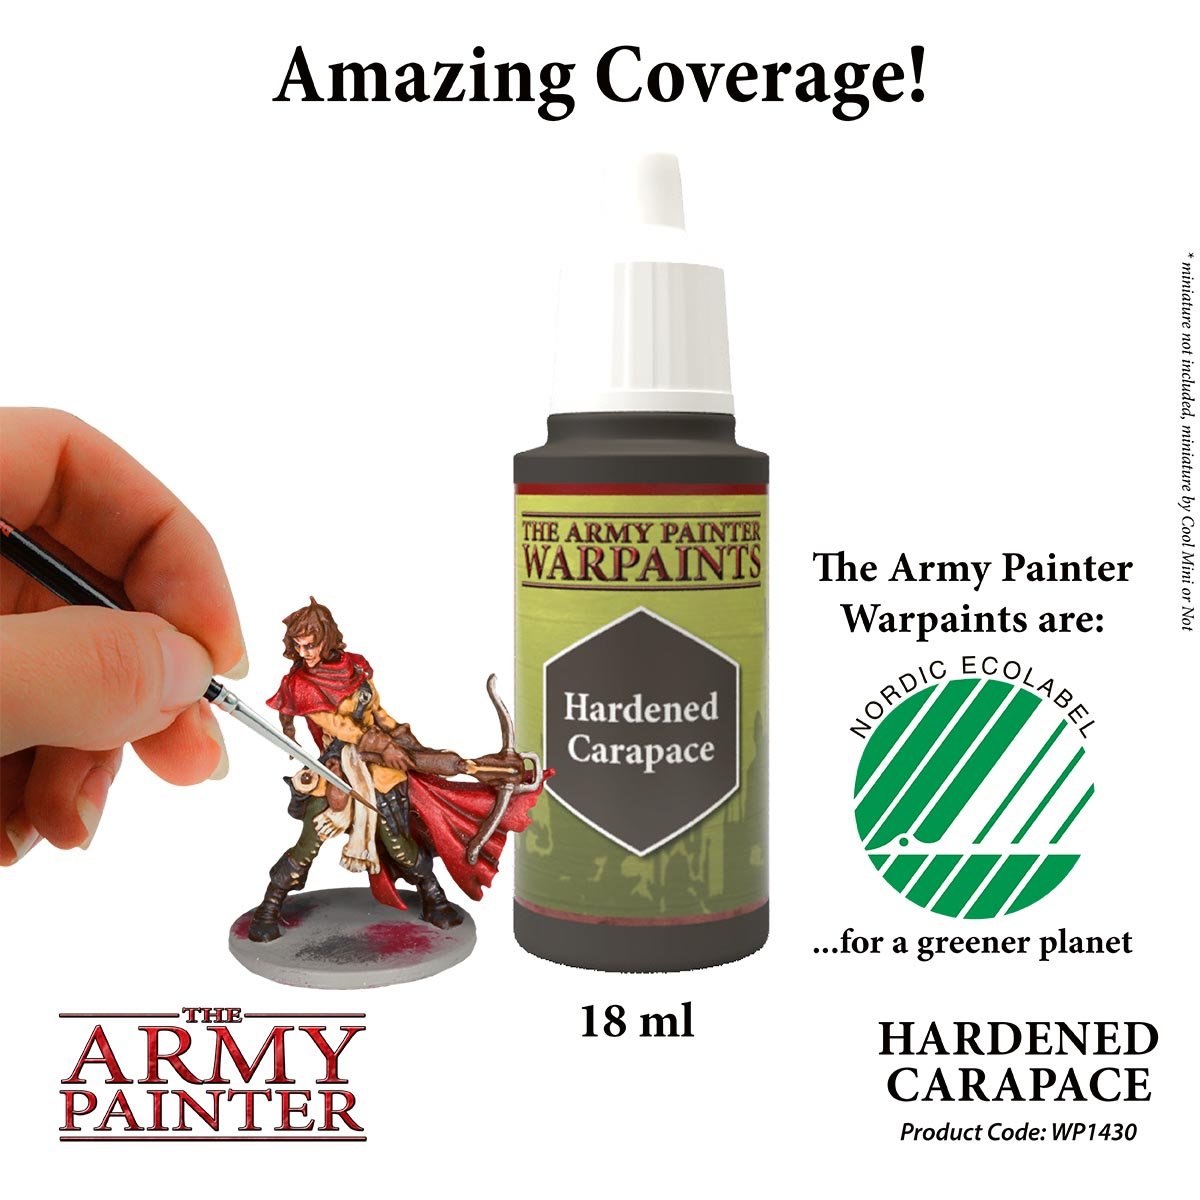 The Army Painter Warpaints WP1430 Hardened Carapace Acrylic Paint 18ml bottle